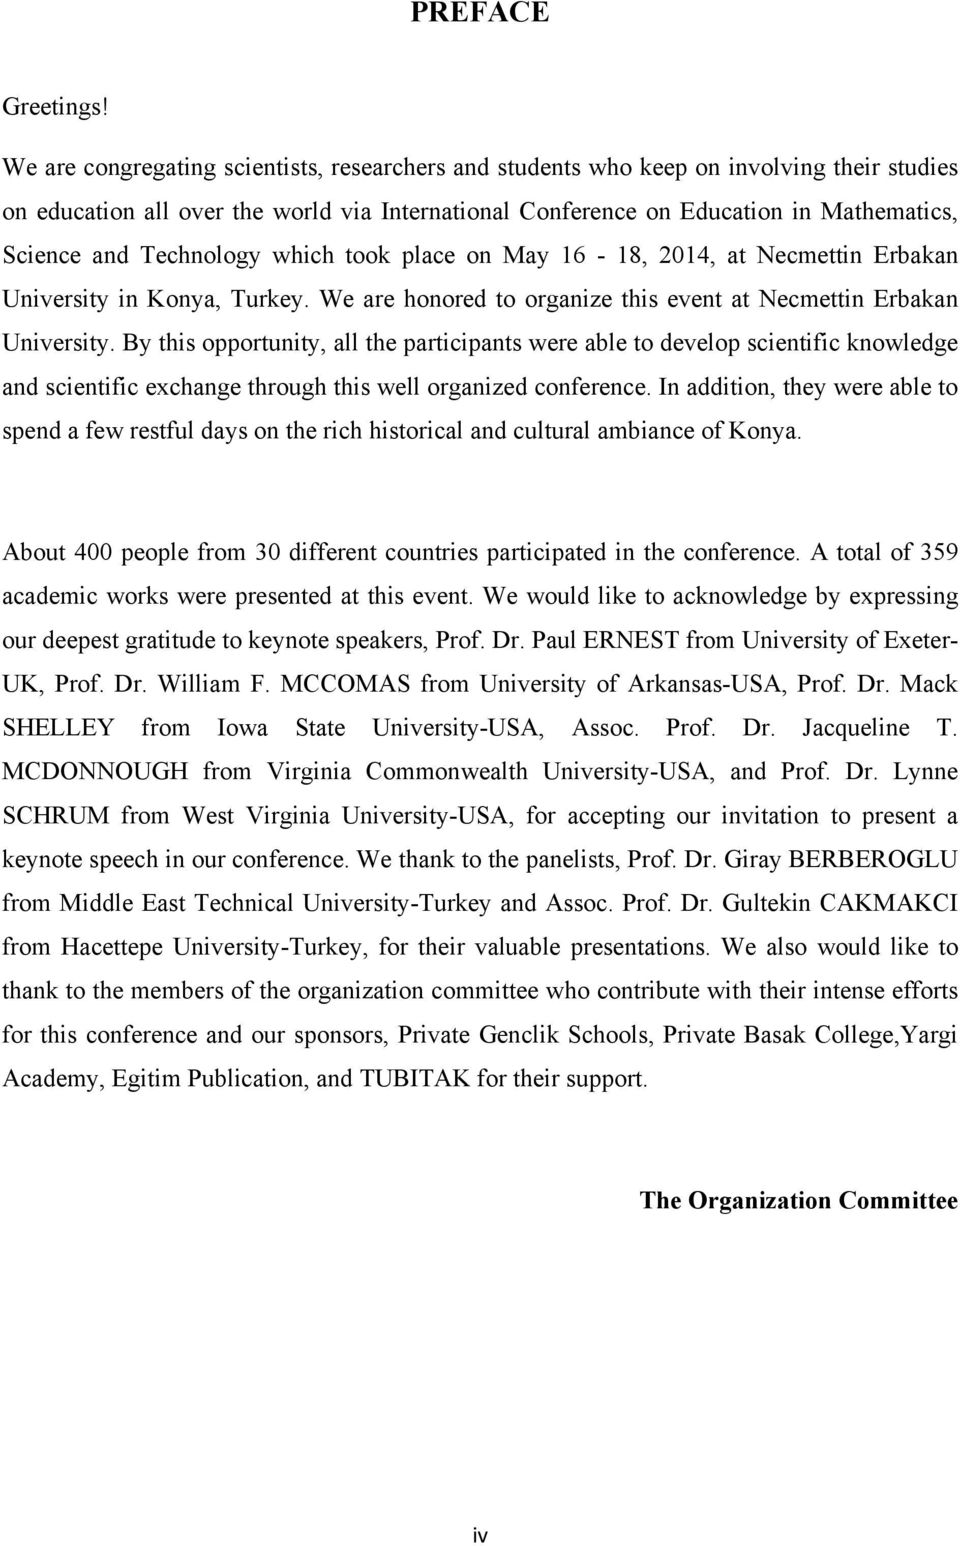 Technology which took place on May 16-18, 2014, at Necmettin Erbakan University in Konya, Turkey. We are honored to organize this event at Necmettin Erbakan University.